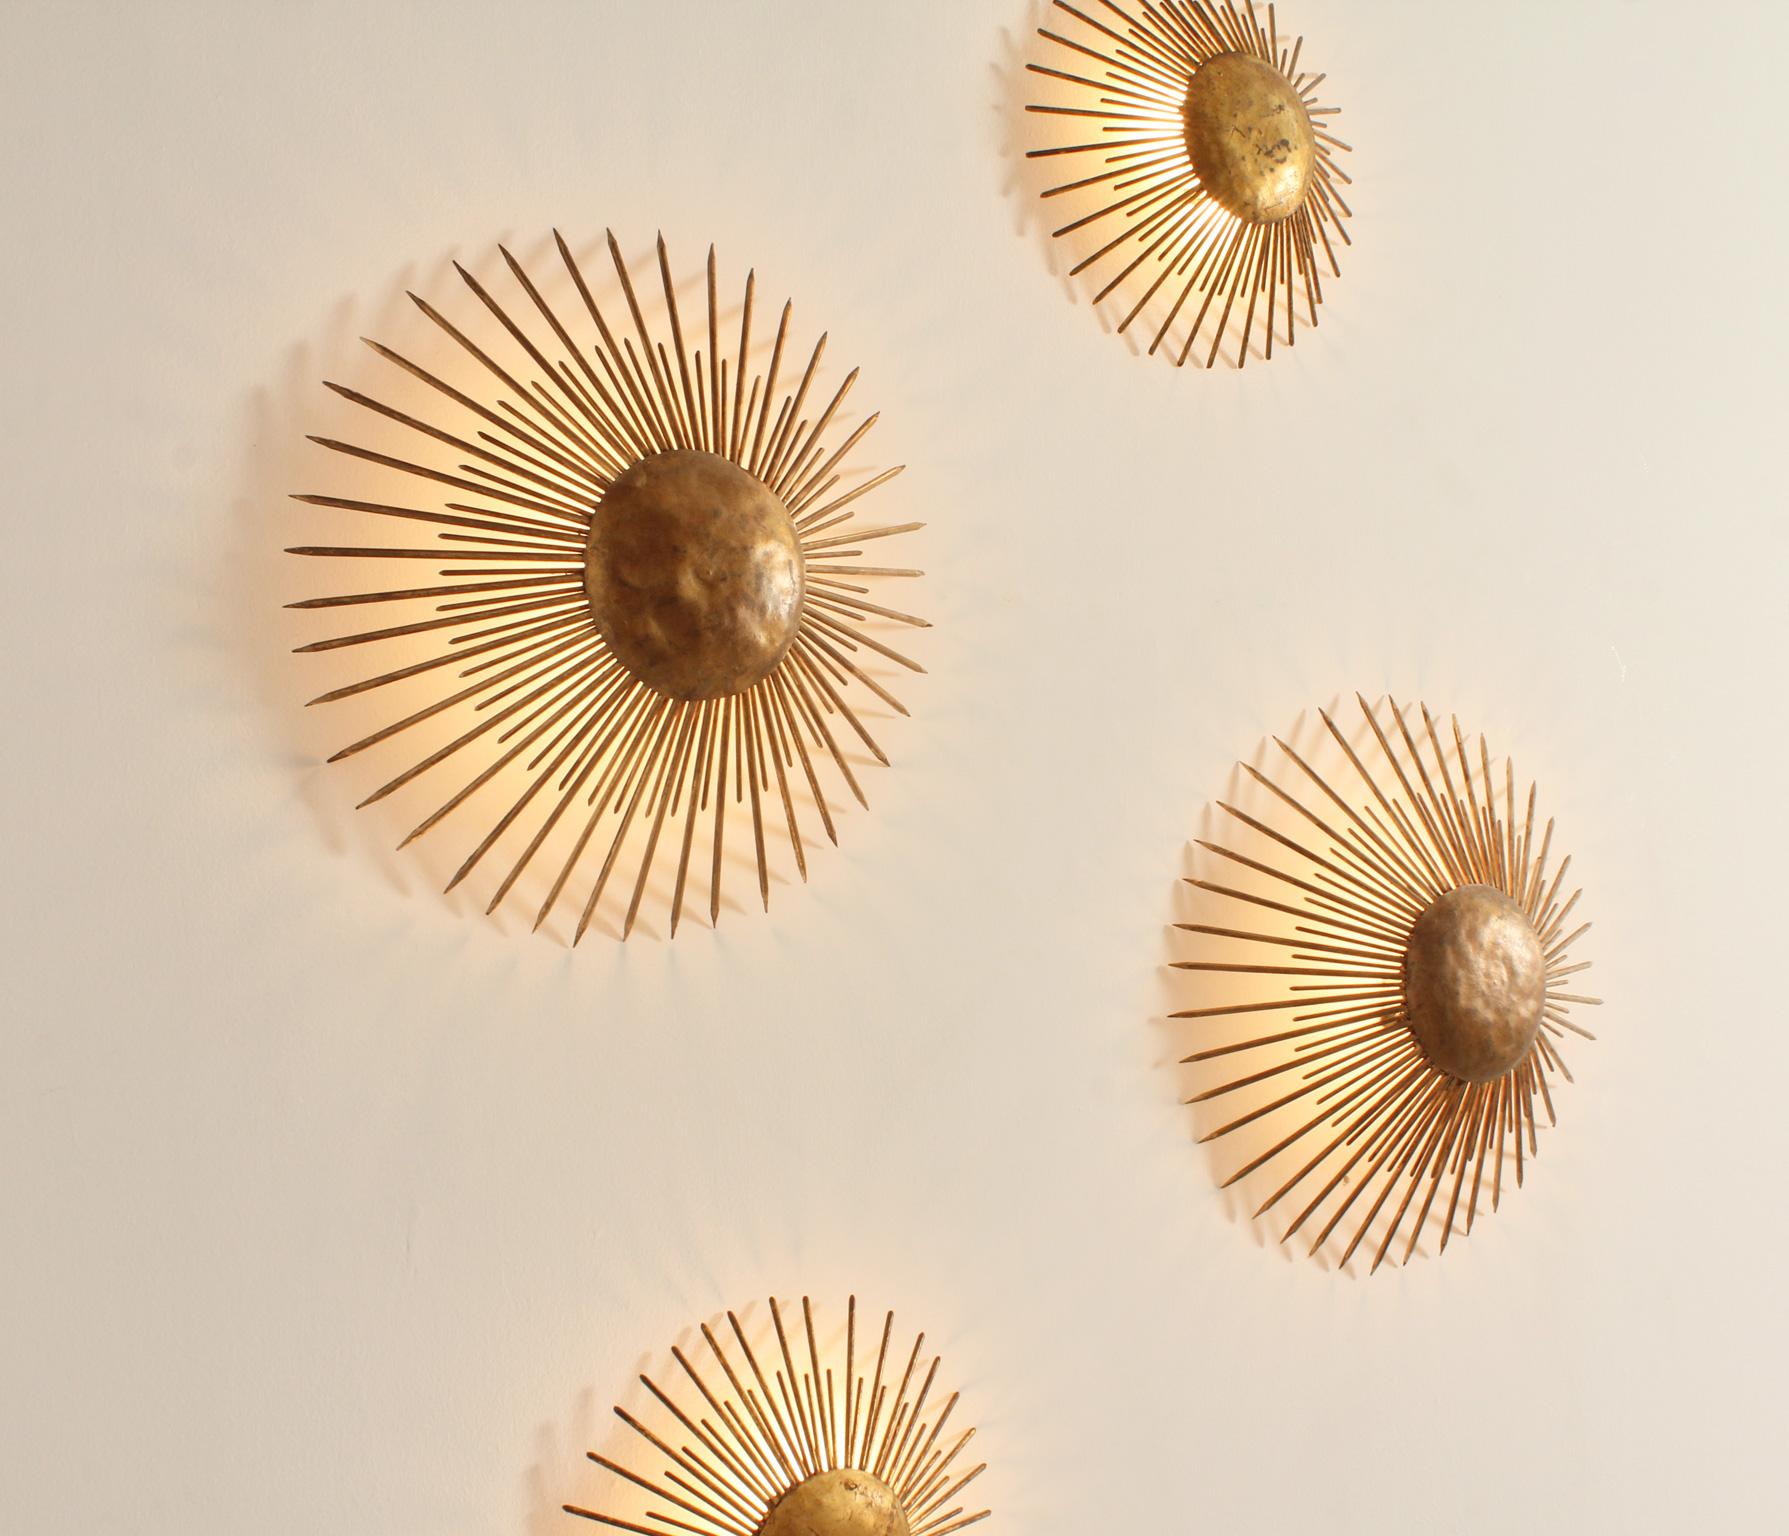 Set of Four Sunburst Wall or Ceiling Lamps in Gilt Iron, Spain, 1950's For Sale 4